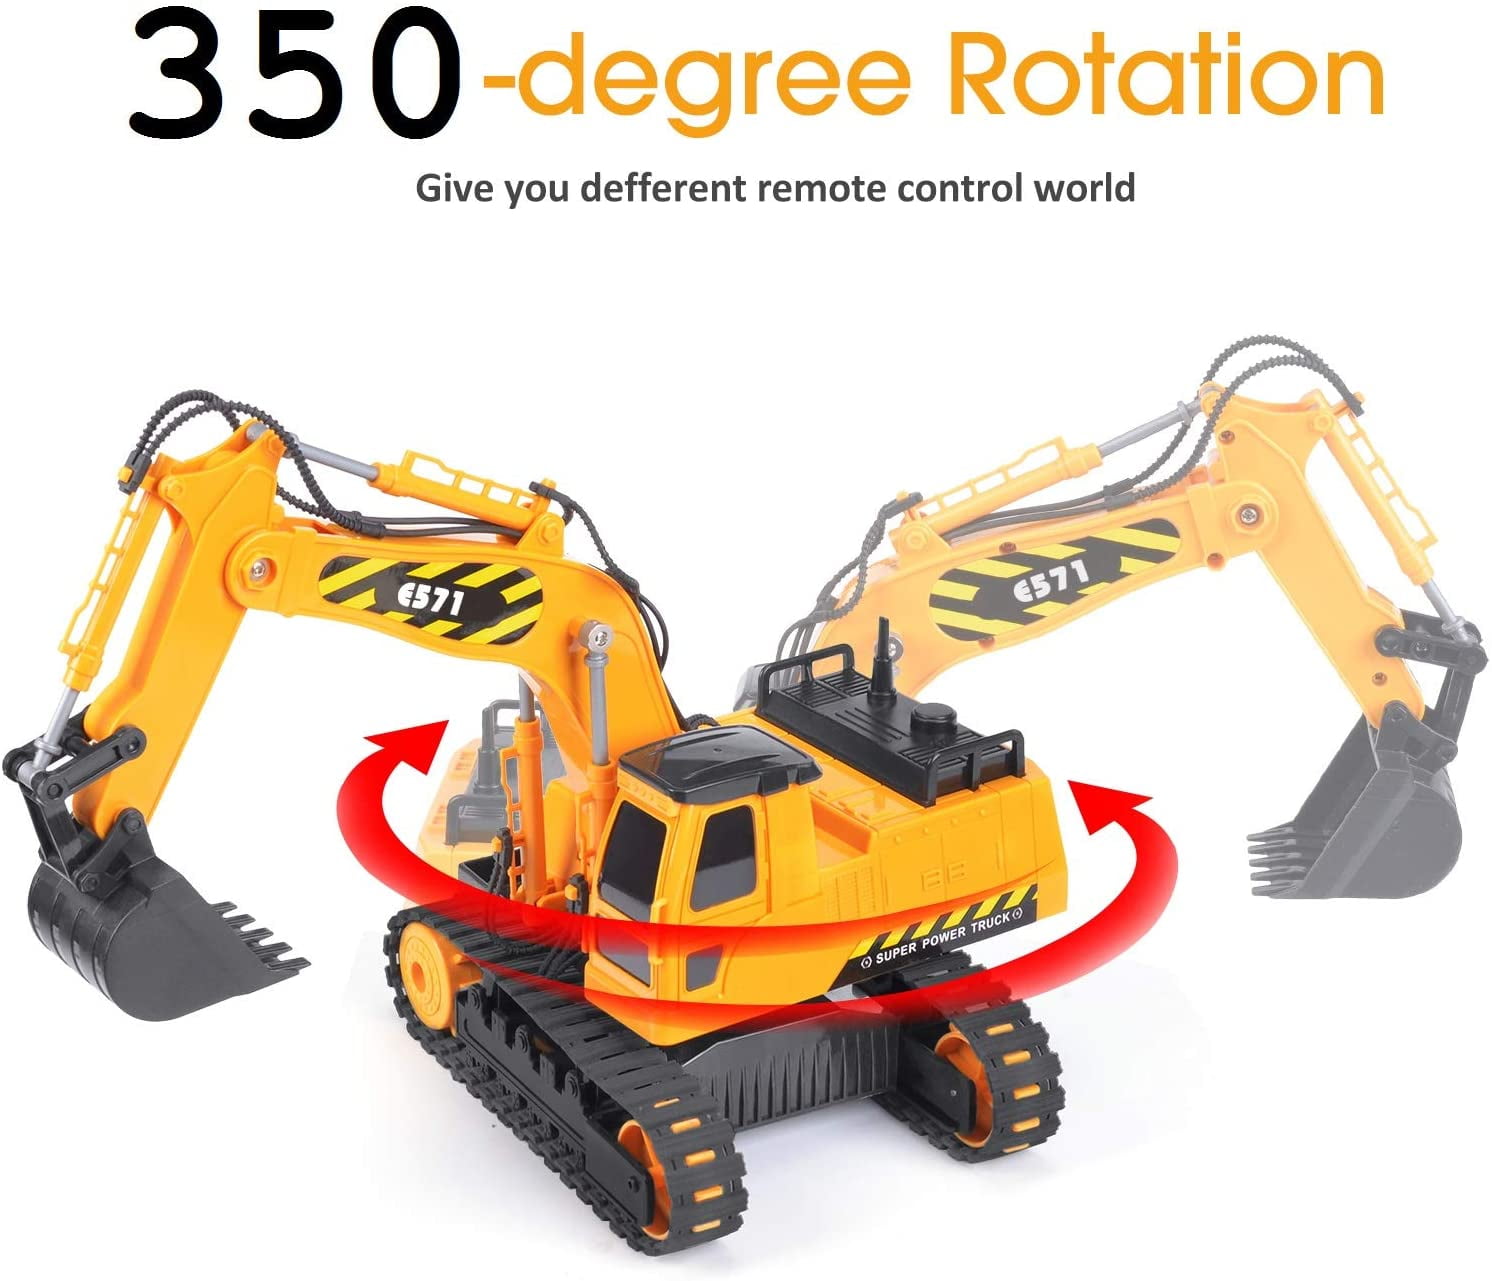 DOUBLE E RC Excavator Toy 2 Rechargeable Batteries Hydraulic Remote Control Construction Trucks Boy Toys with Working Sounds for Boys Girls Kids 